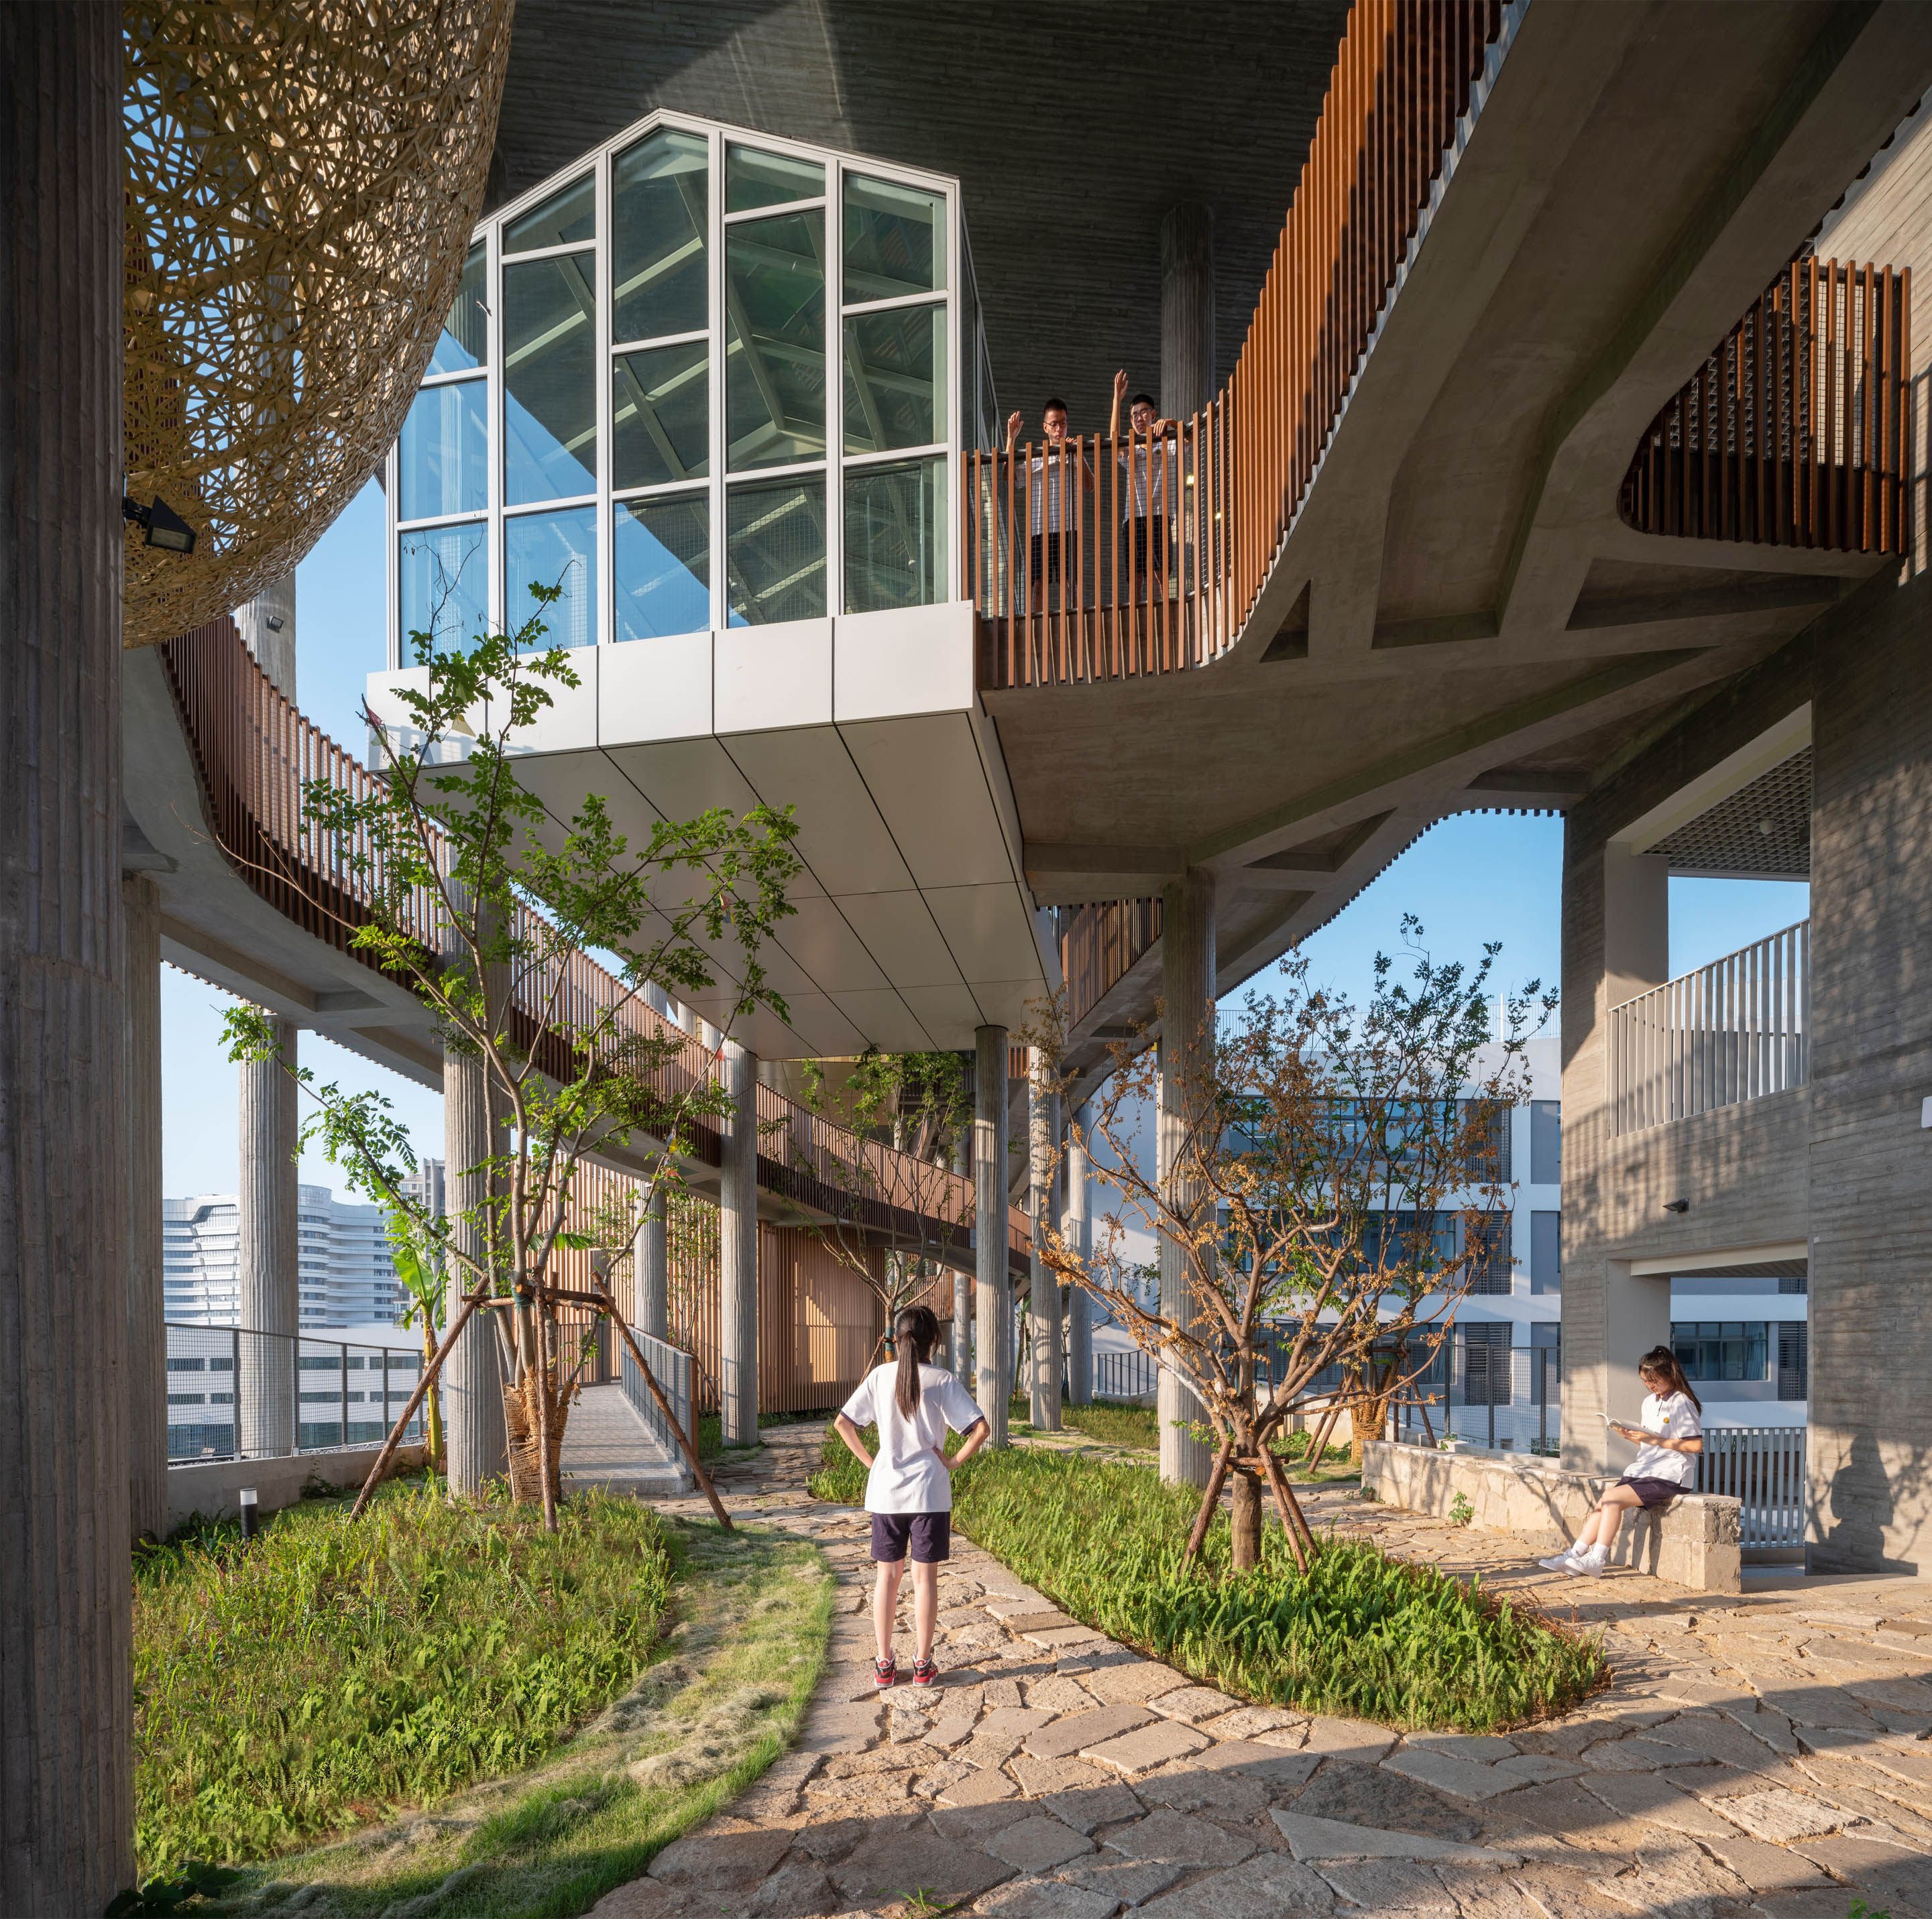 At Huizhen High School, in Ningbo, China - the World Building of the Year 2023 - pathways between classrooms are meandering routes that take in greenery, one of many architectural elements designed to relieve academic pressure. Photo: Courtesy of Approach Design Studio